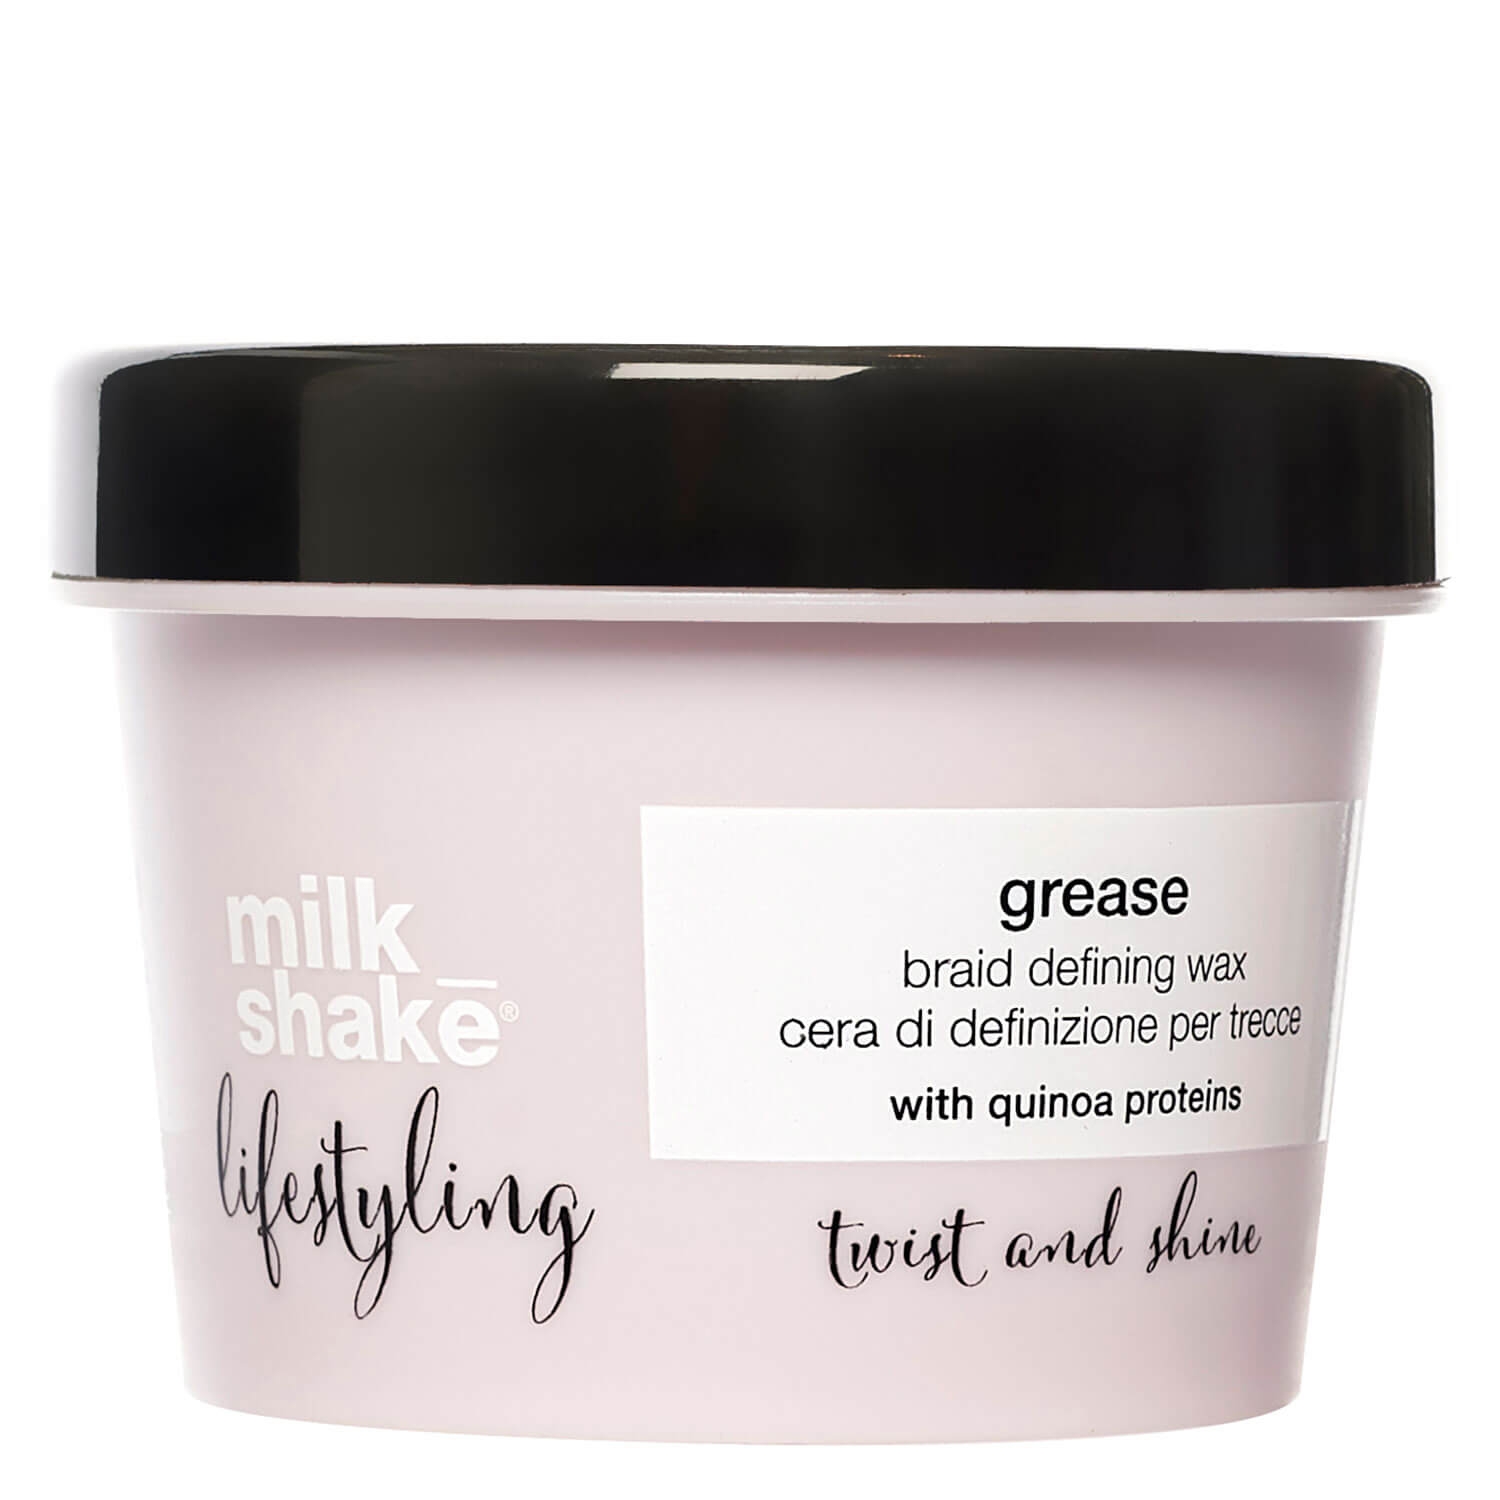 Product image from milk_shake lifestyling - grease braid defining wax